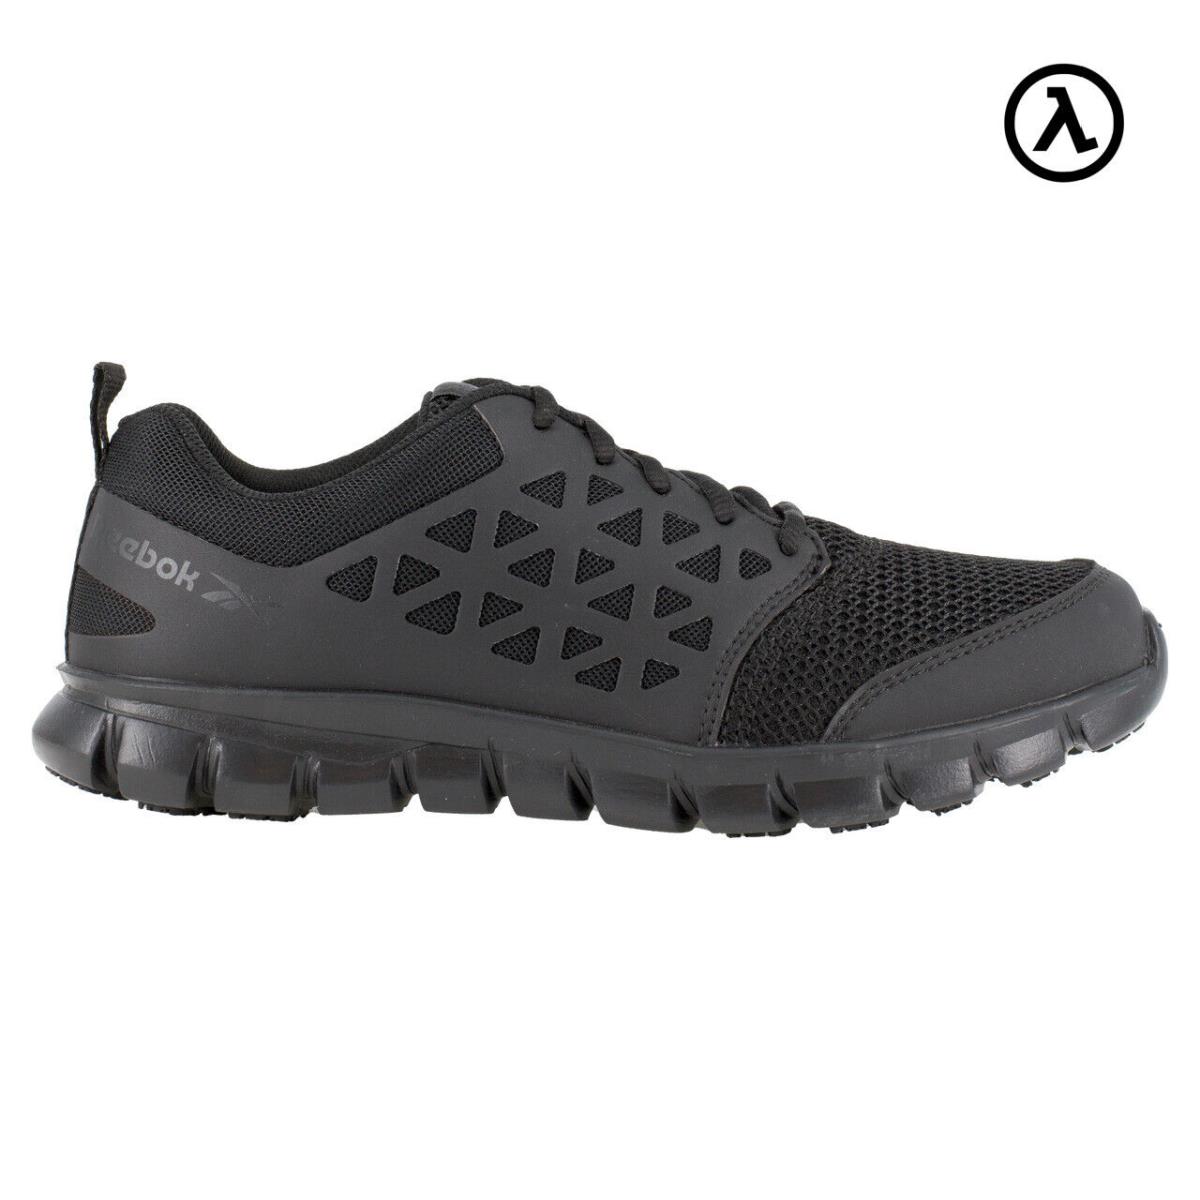 Reebok Sublite Cushion Work Women`s Athletic Shoe Black Boots RB435 - All Sizes